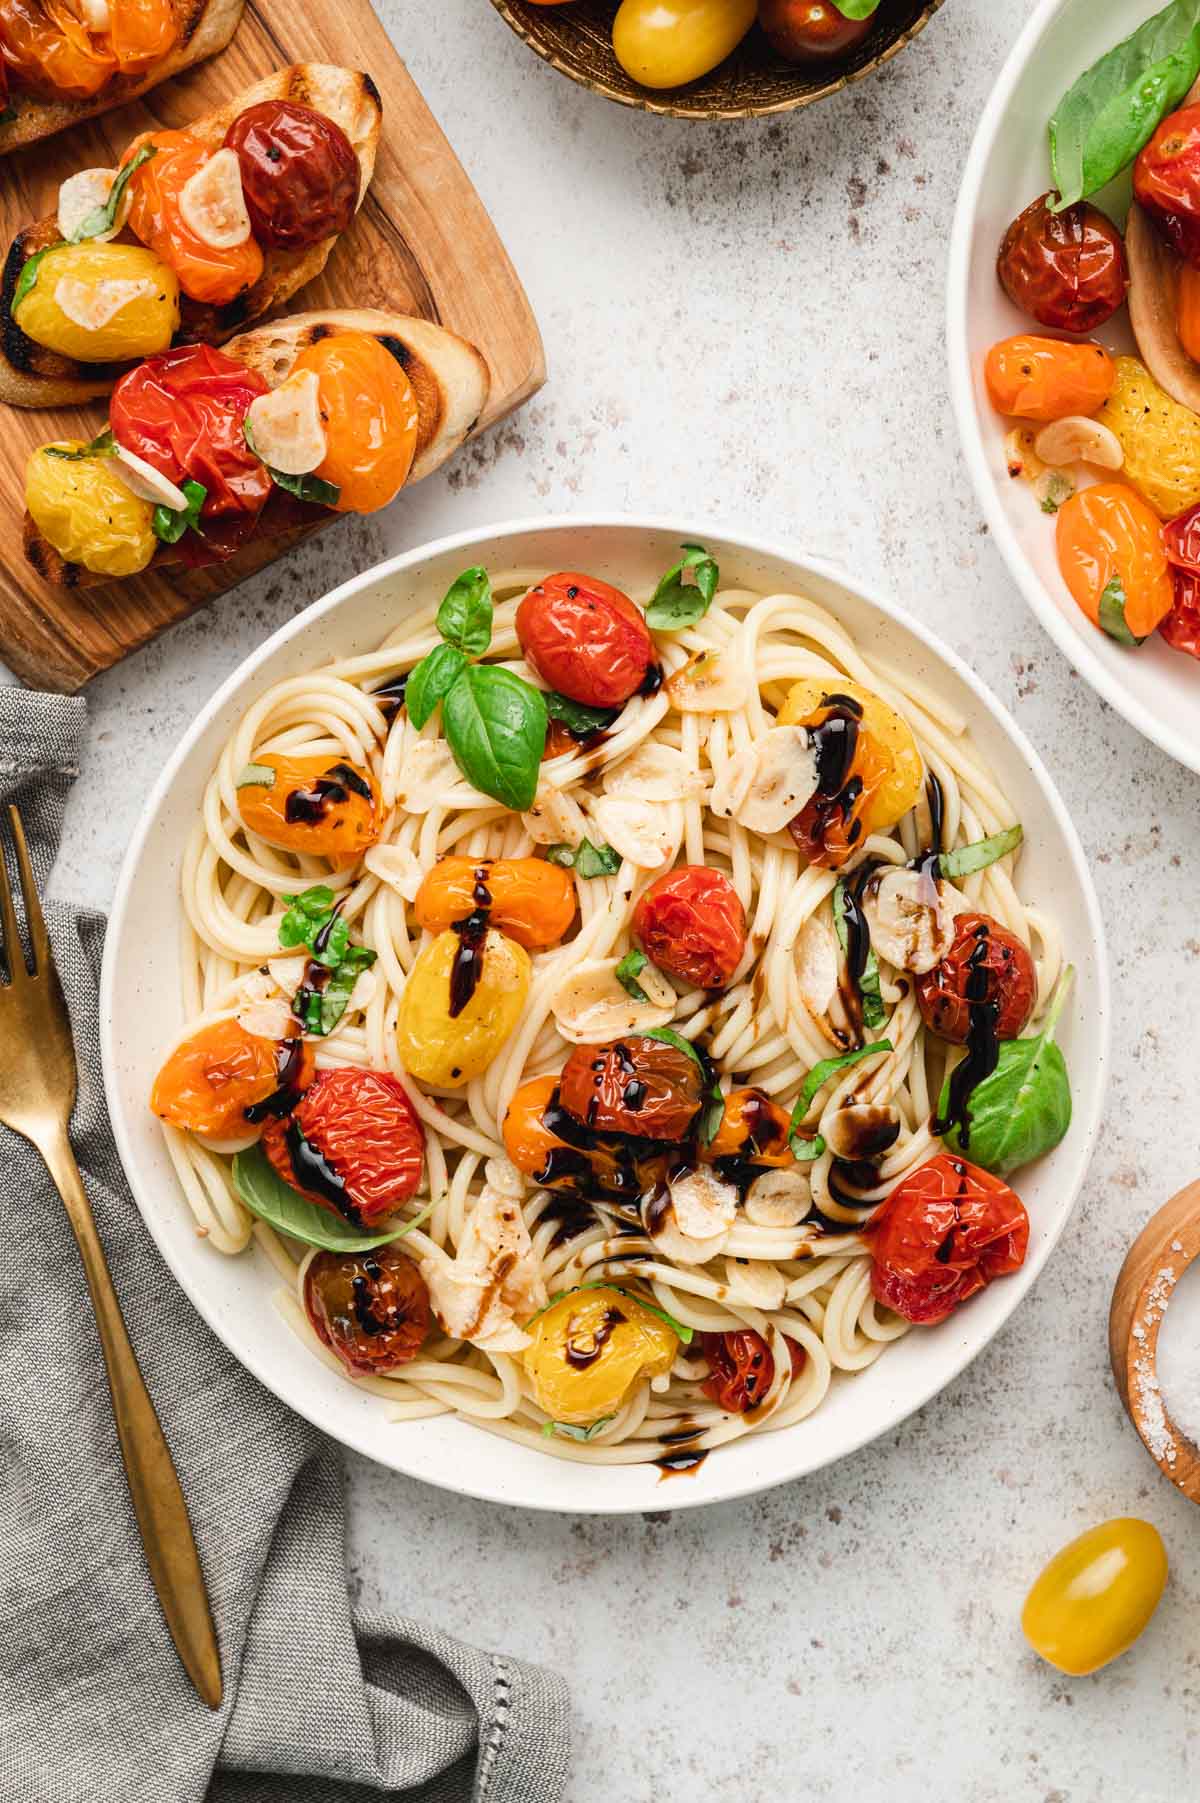 Pasta with tomatoes and balsamic vinegar drizzle.